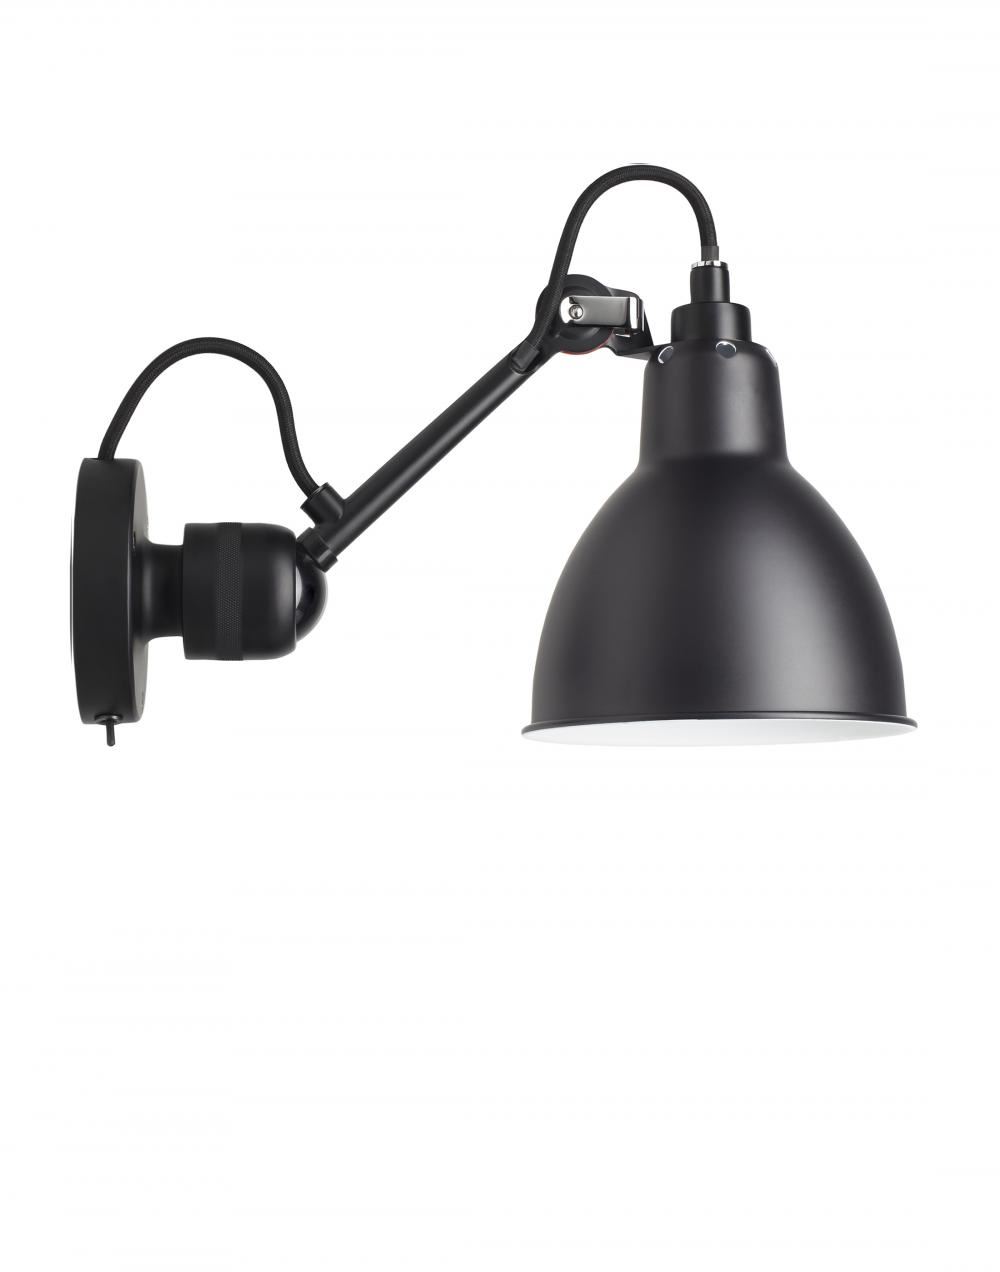 Lampe Gras 304 Small Wall Light Black Arm Black Shade Round Integral Switch